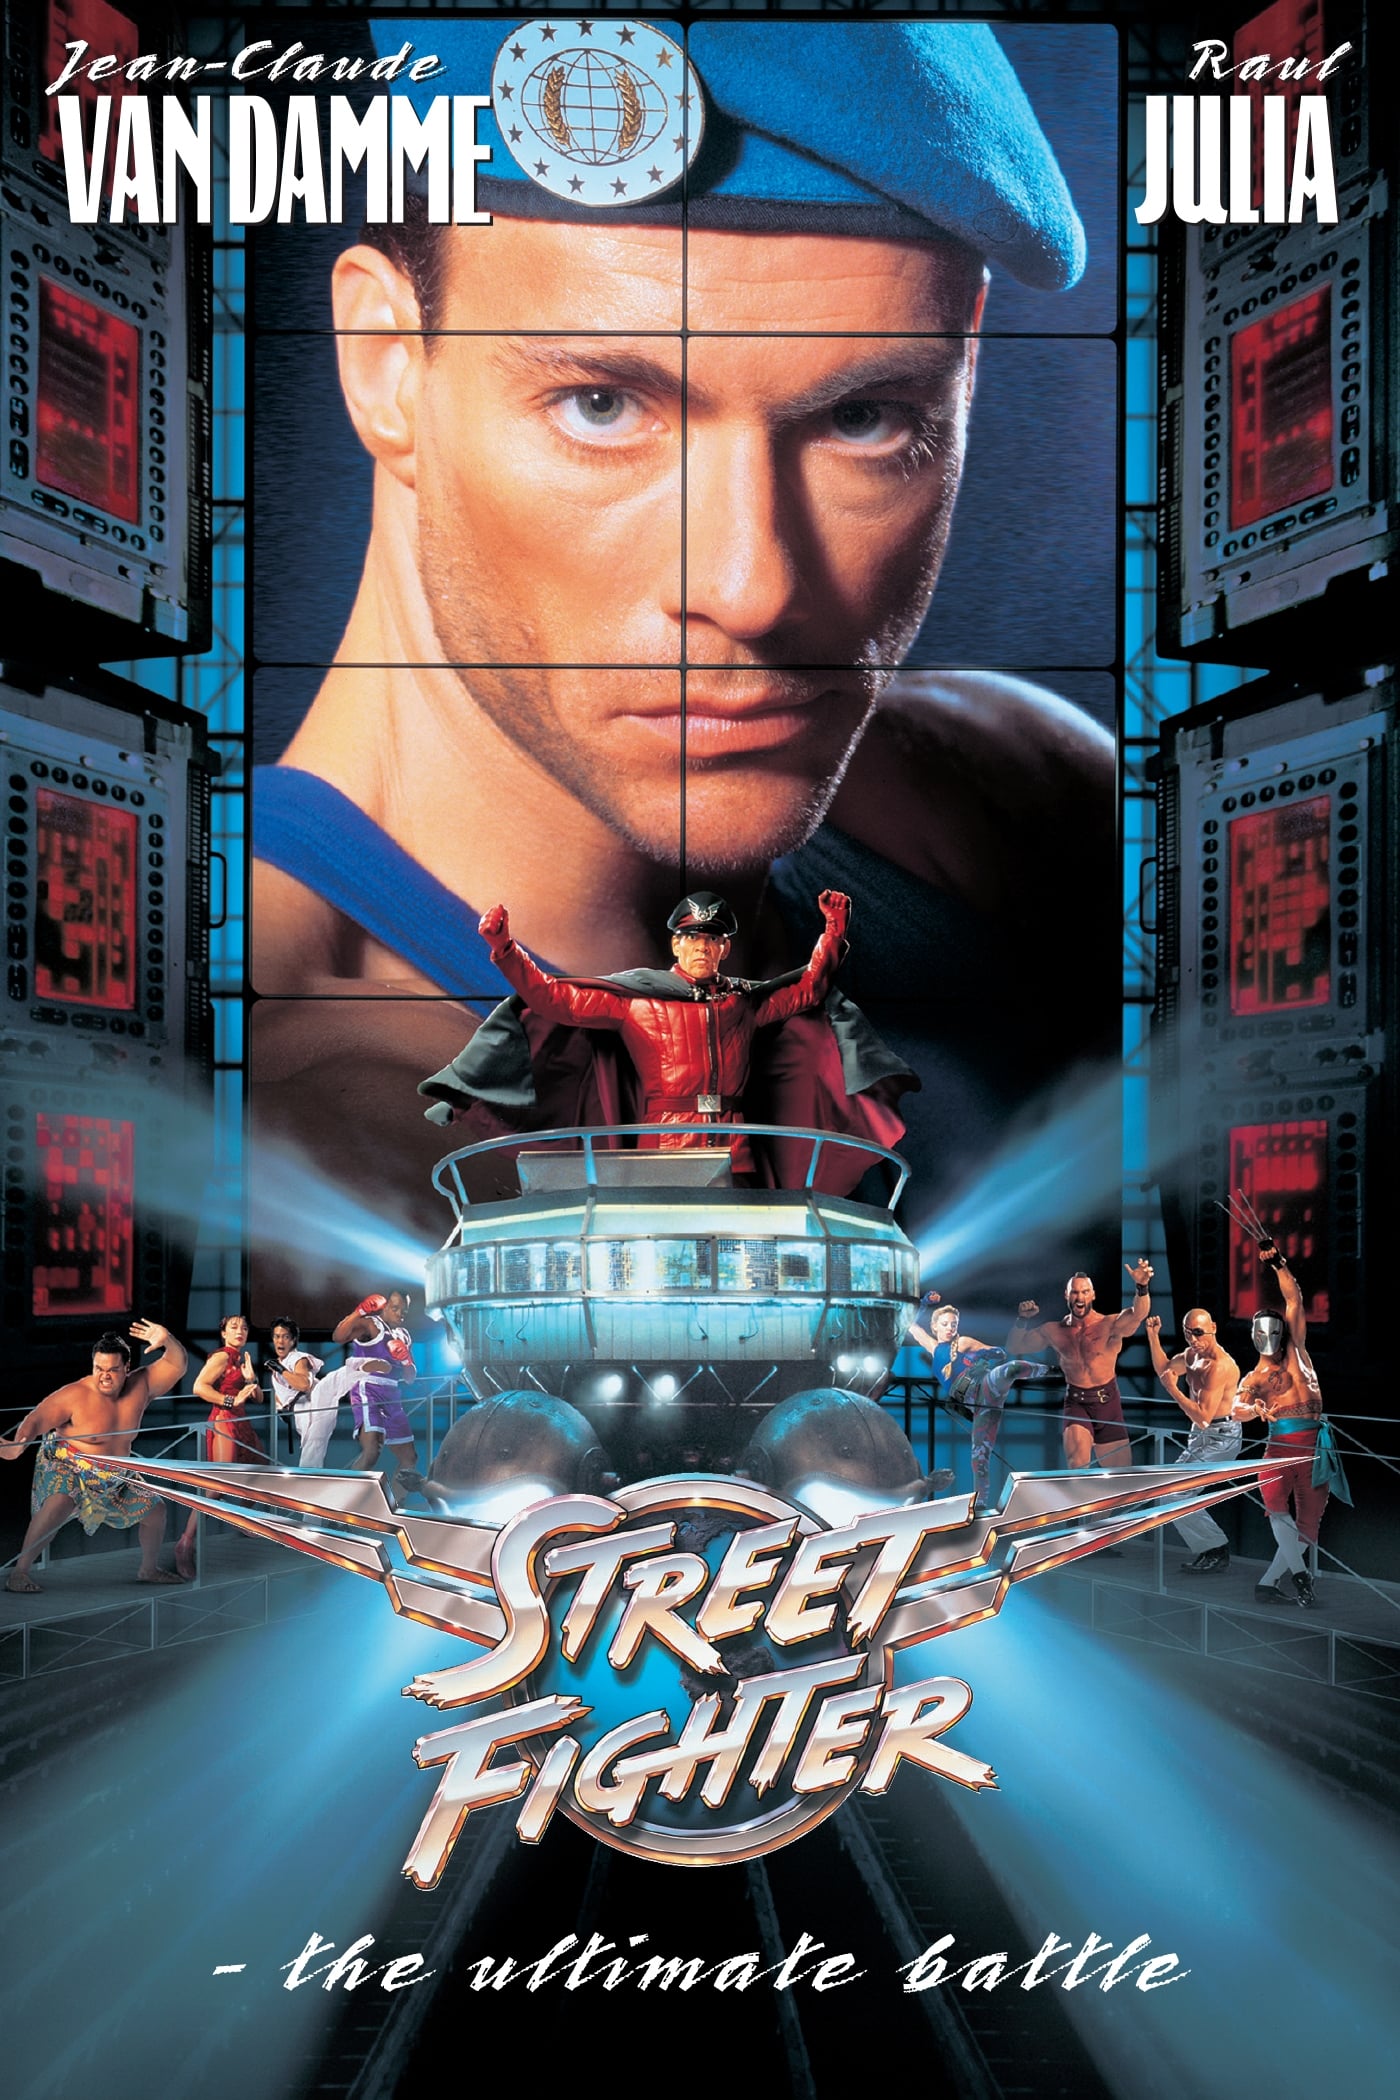 Street Fighter: The Complete History Of The 1994 Jean-Claude Van Damme Movie